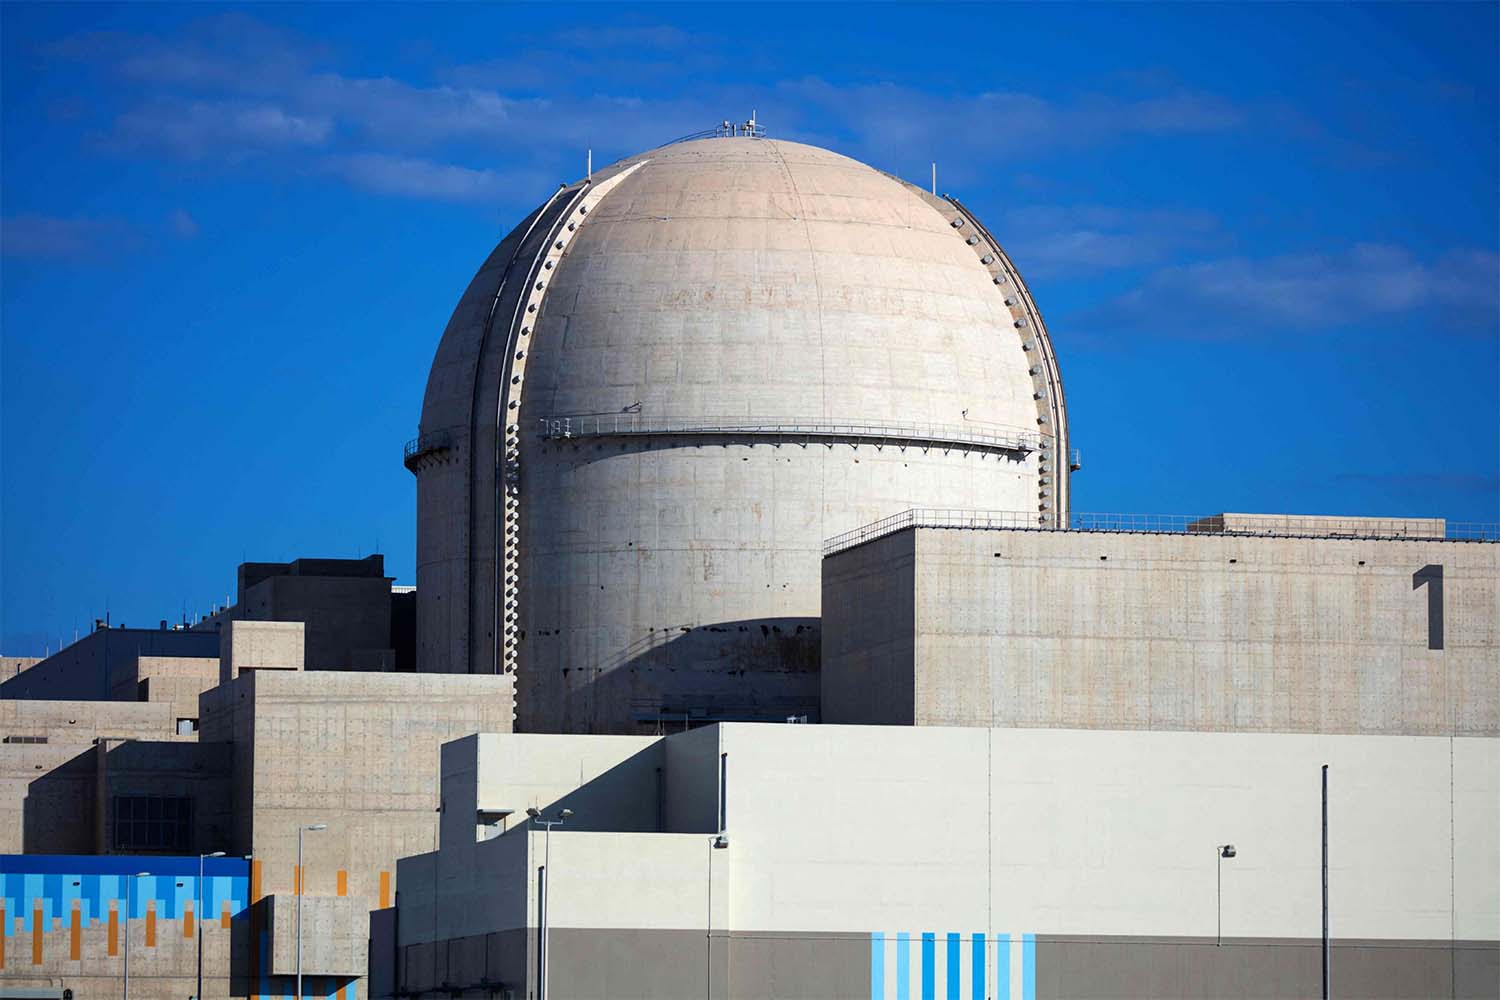 Barakah Nuclear Energy Plant is one of the largest nuclear energy plants in the world